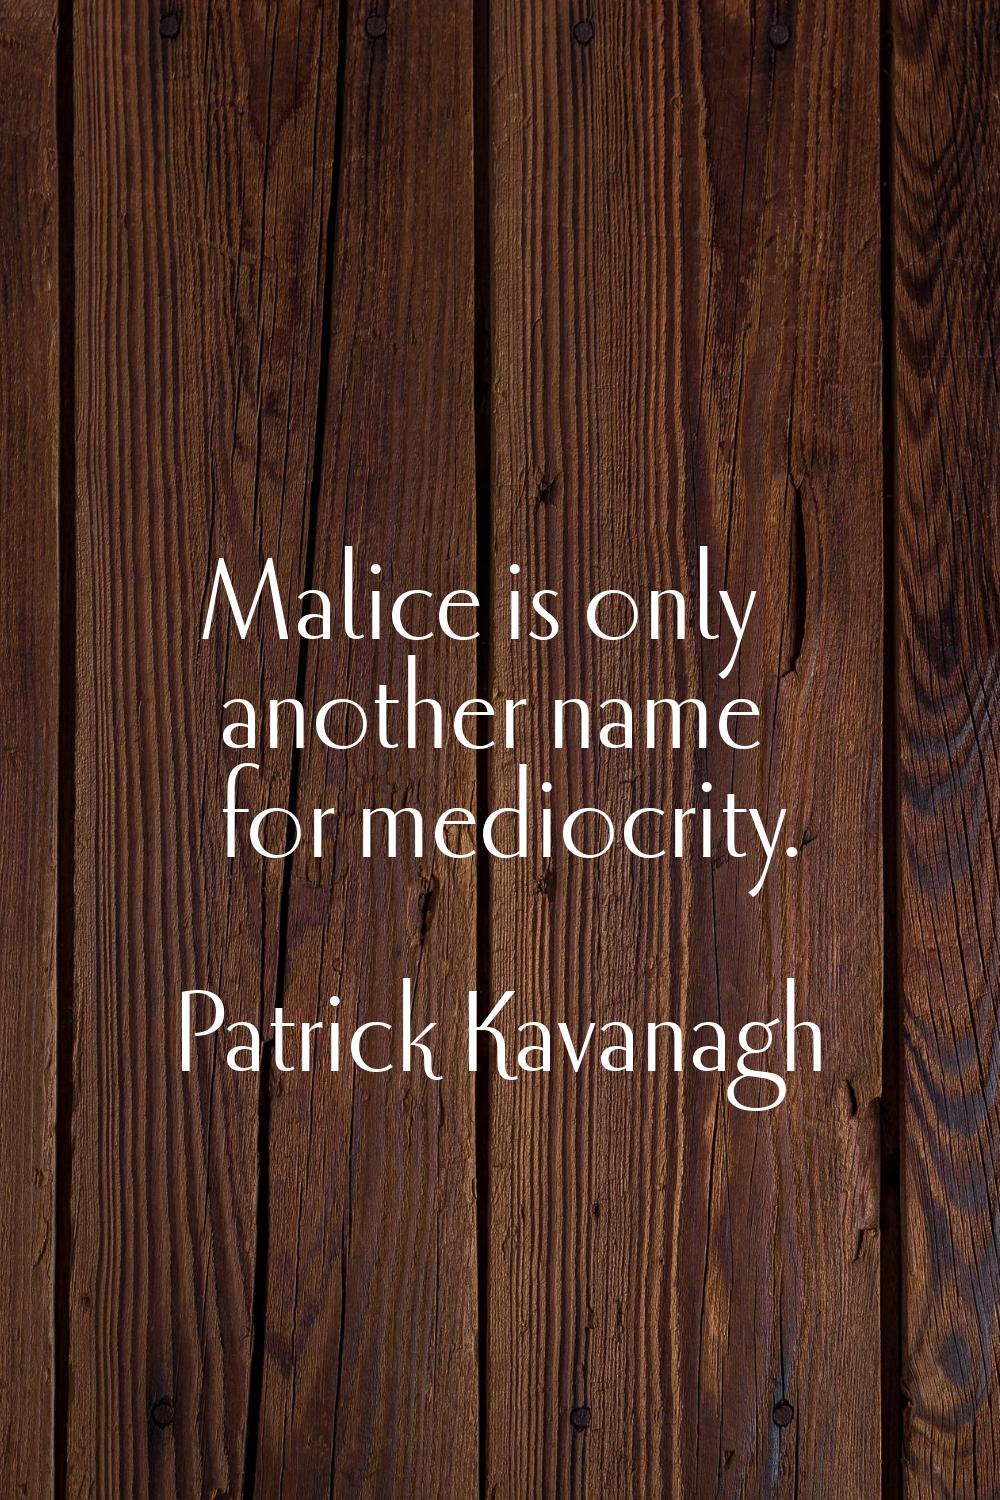 Malice is only another name for mediocrity.